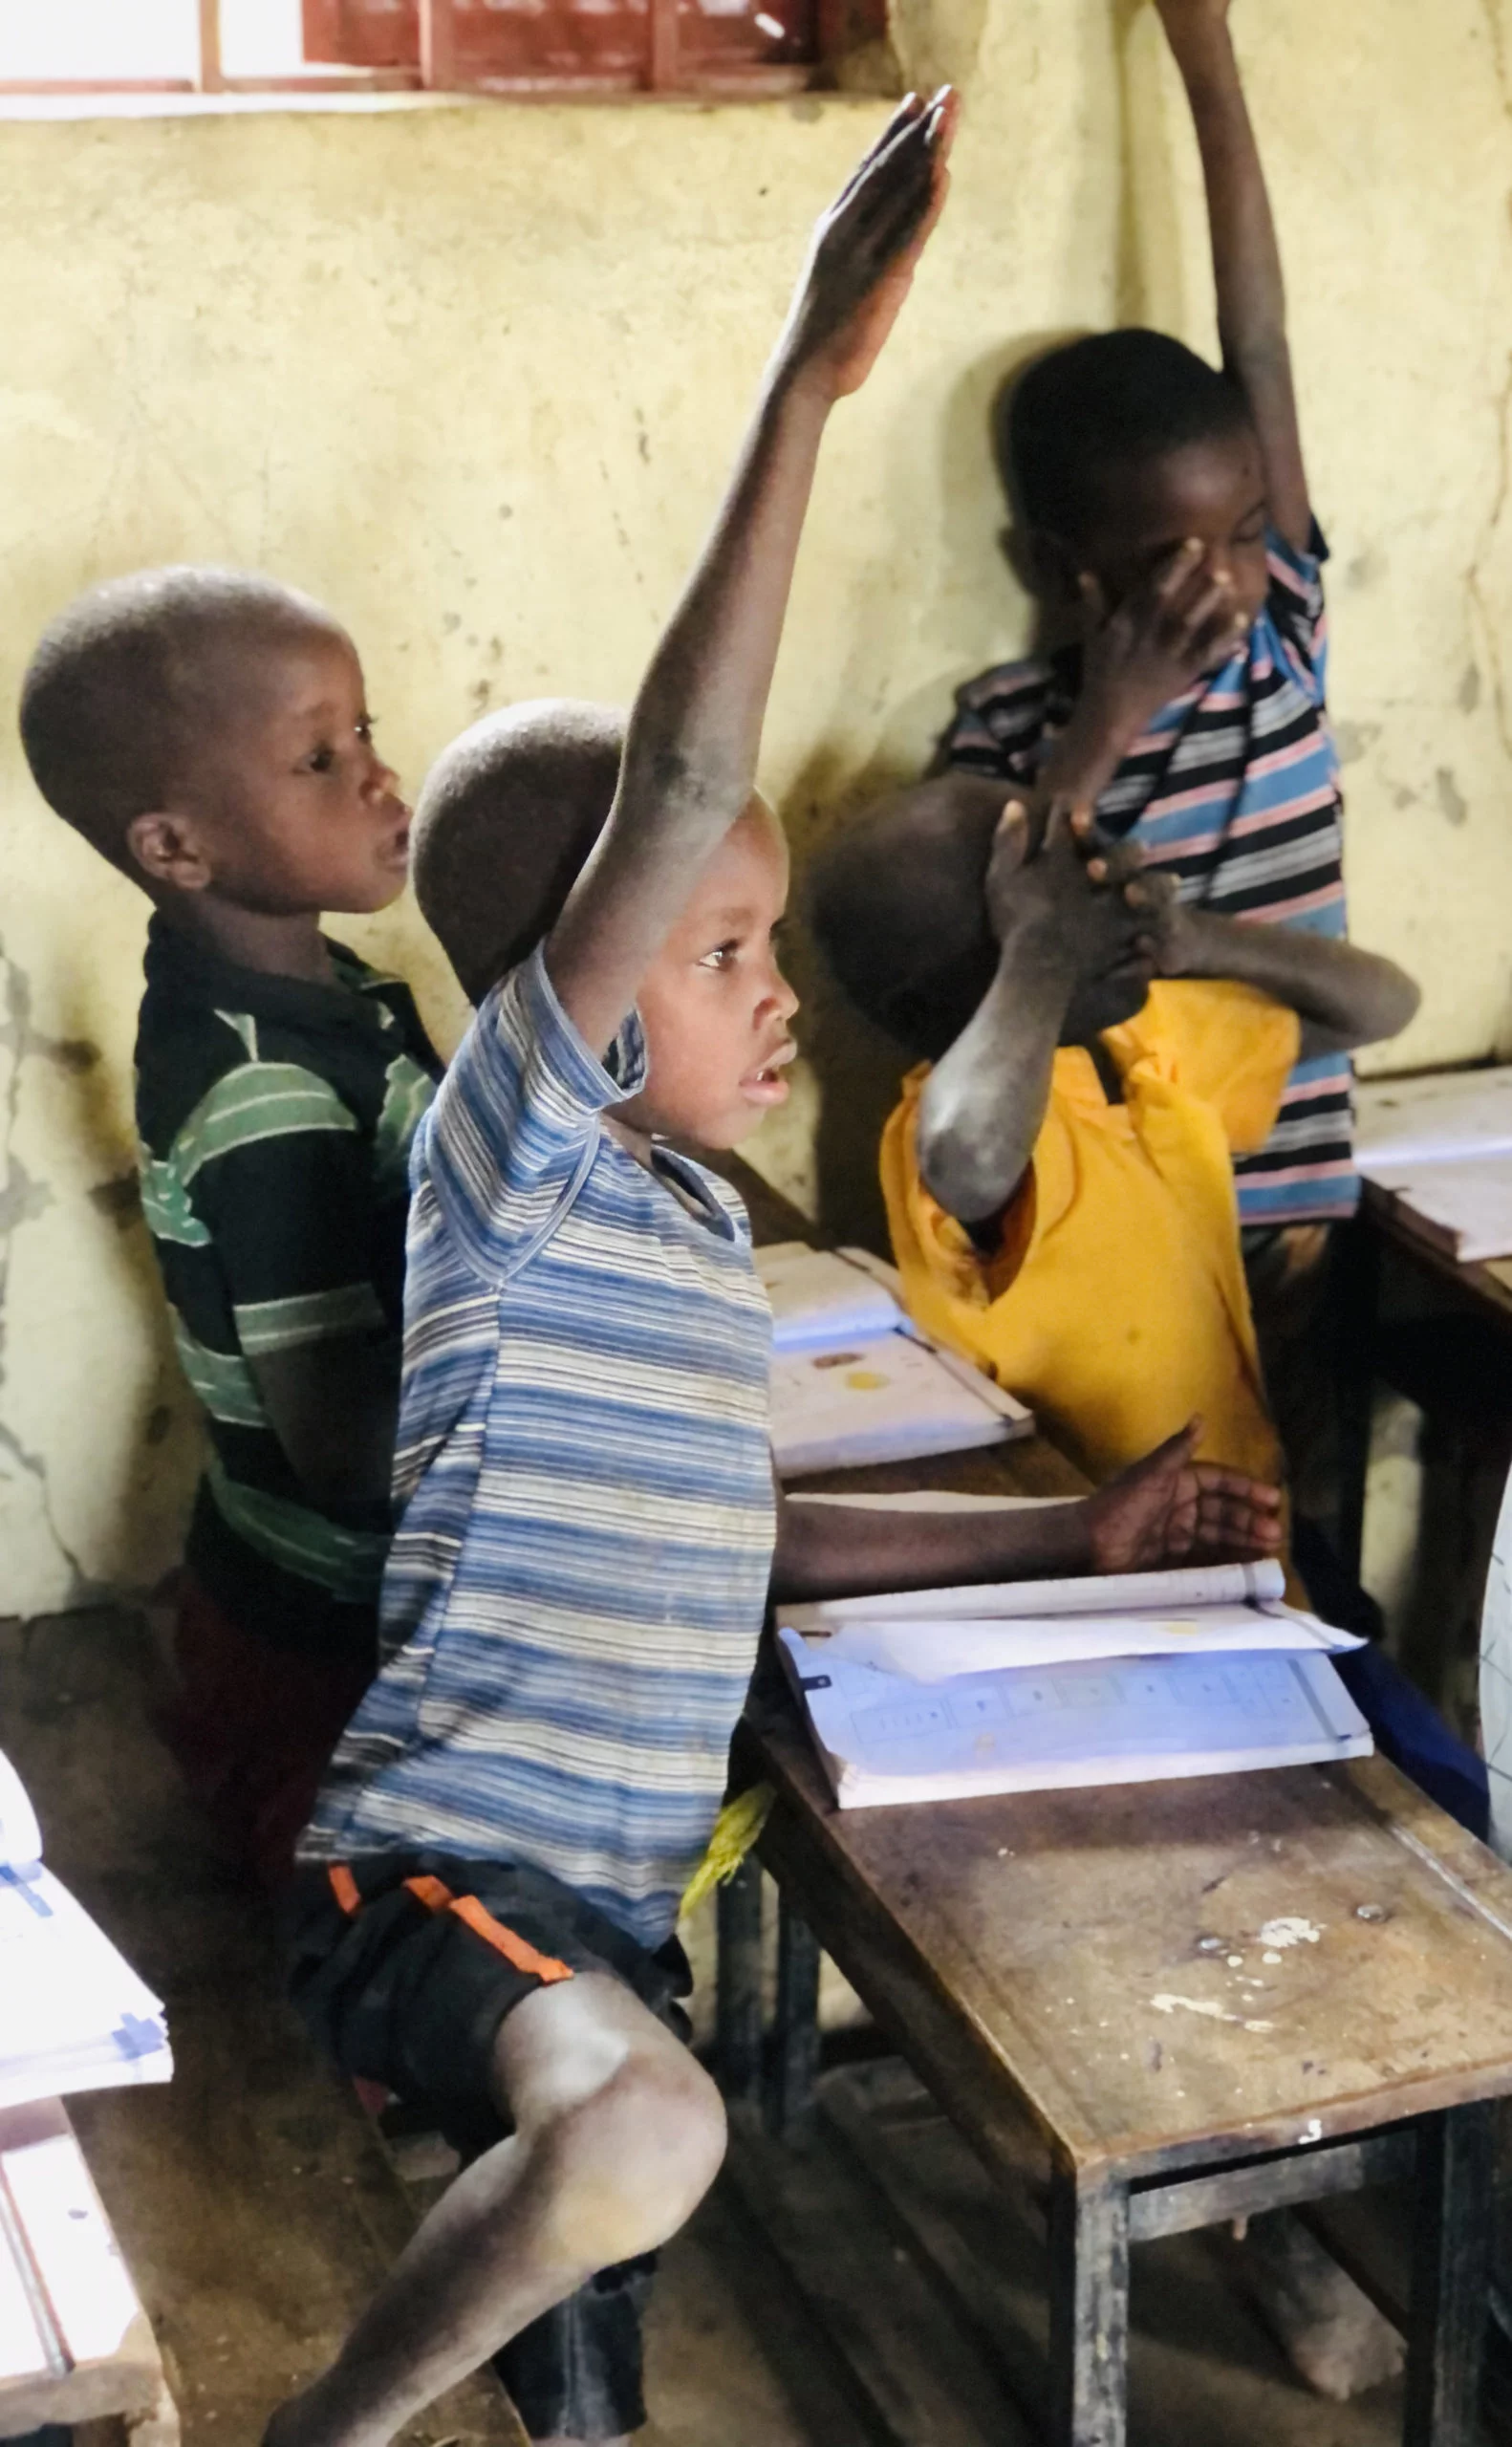 Image of Pokot children with arms up high to answer a question during school class